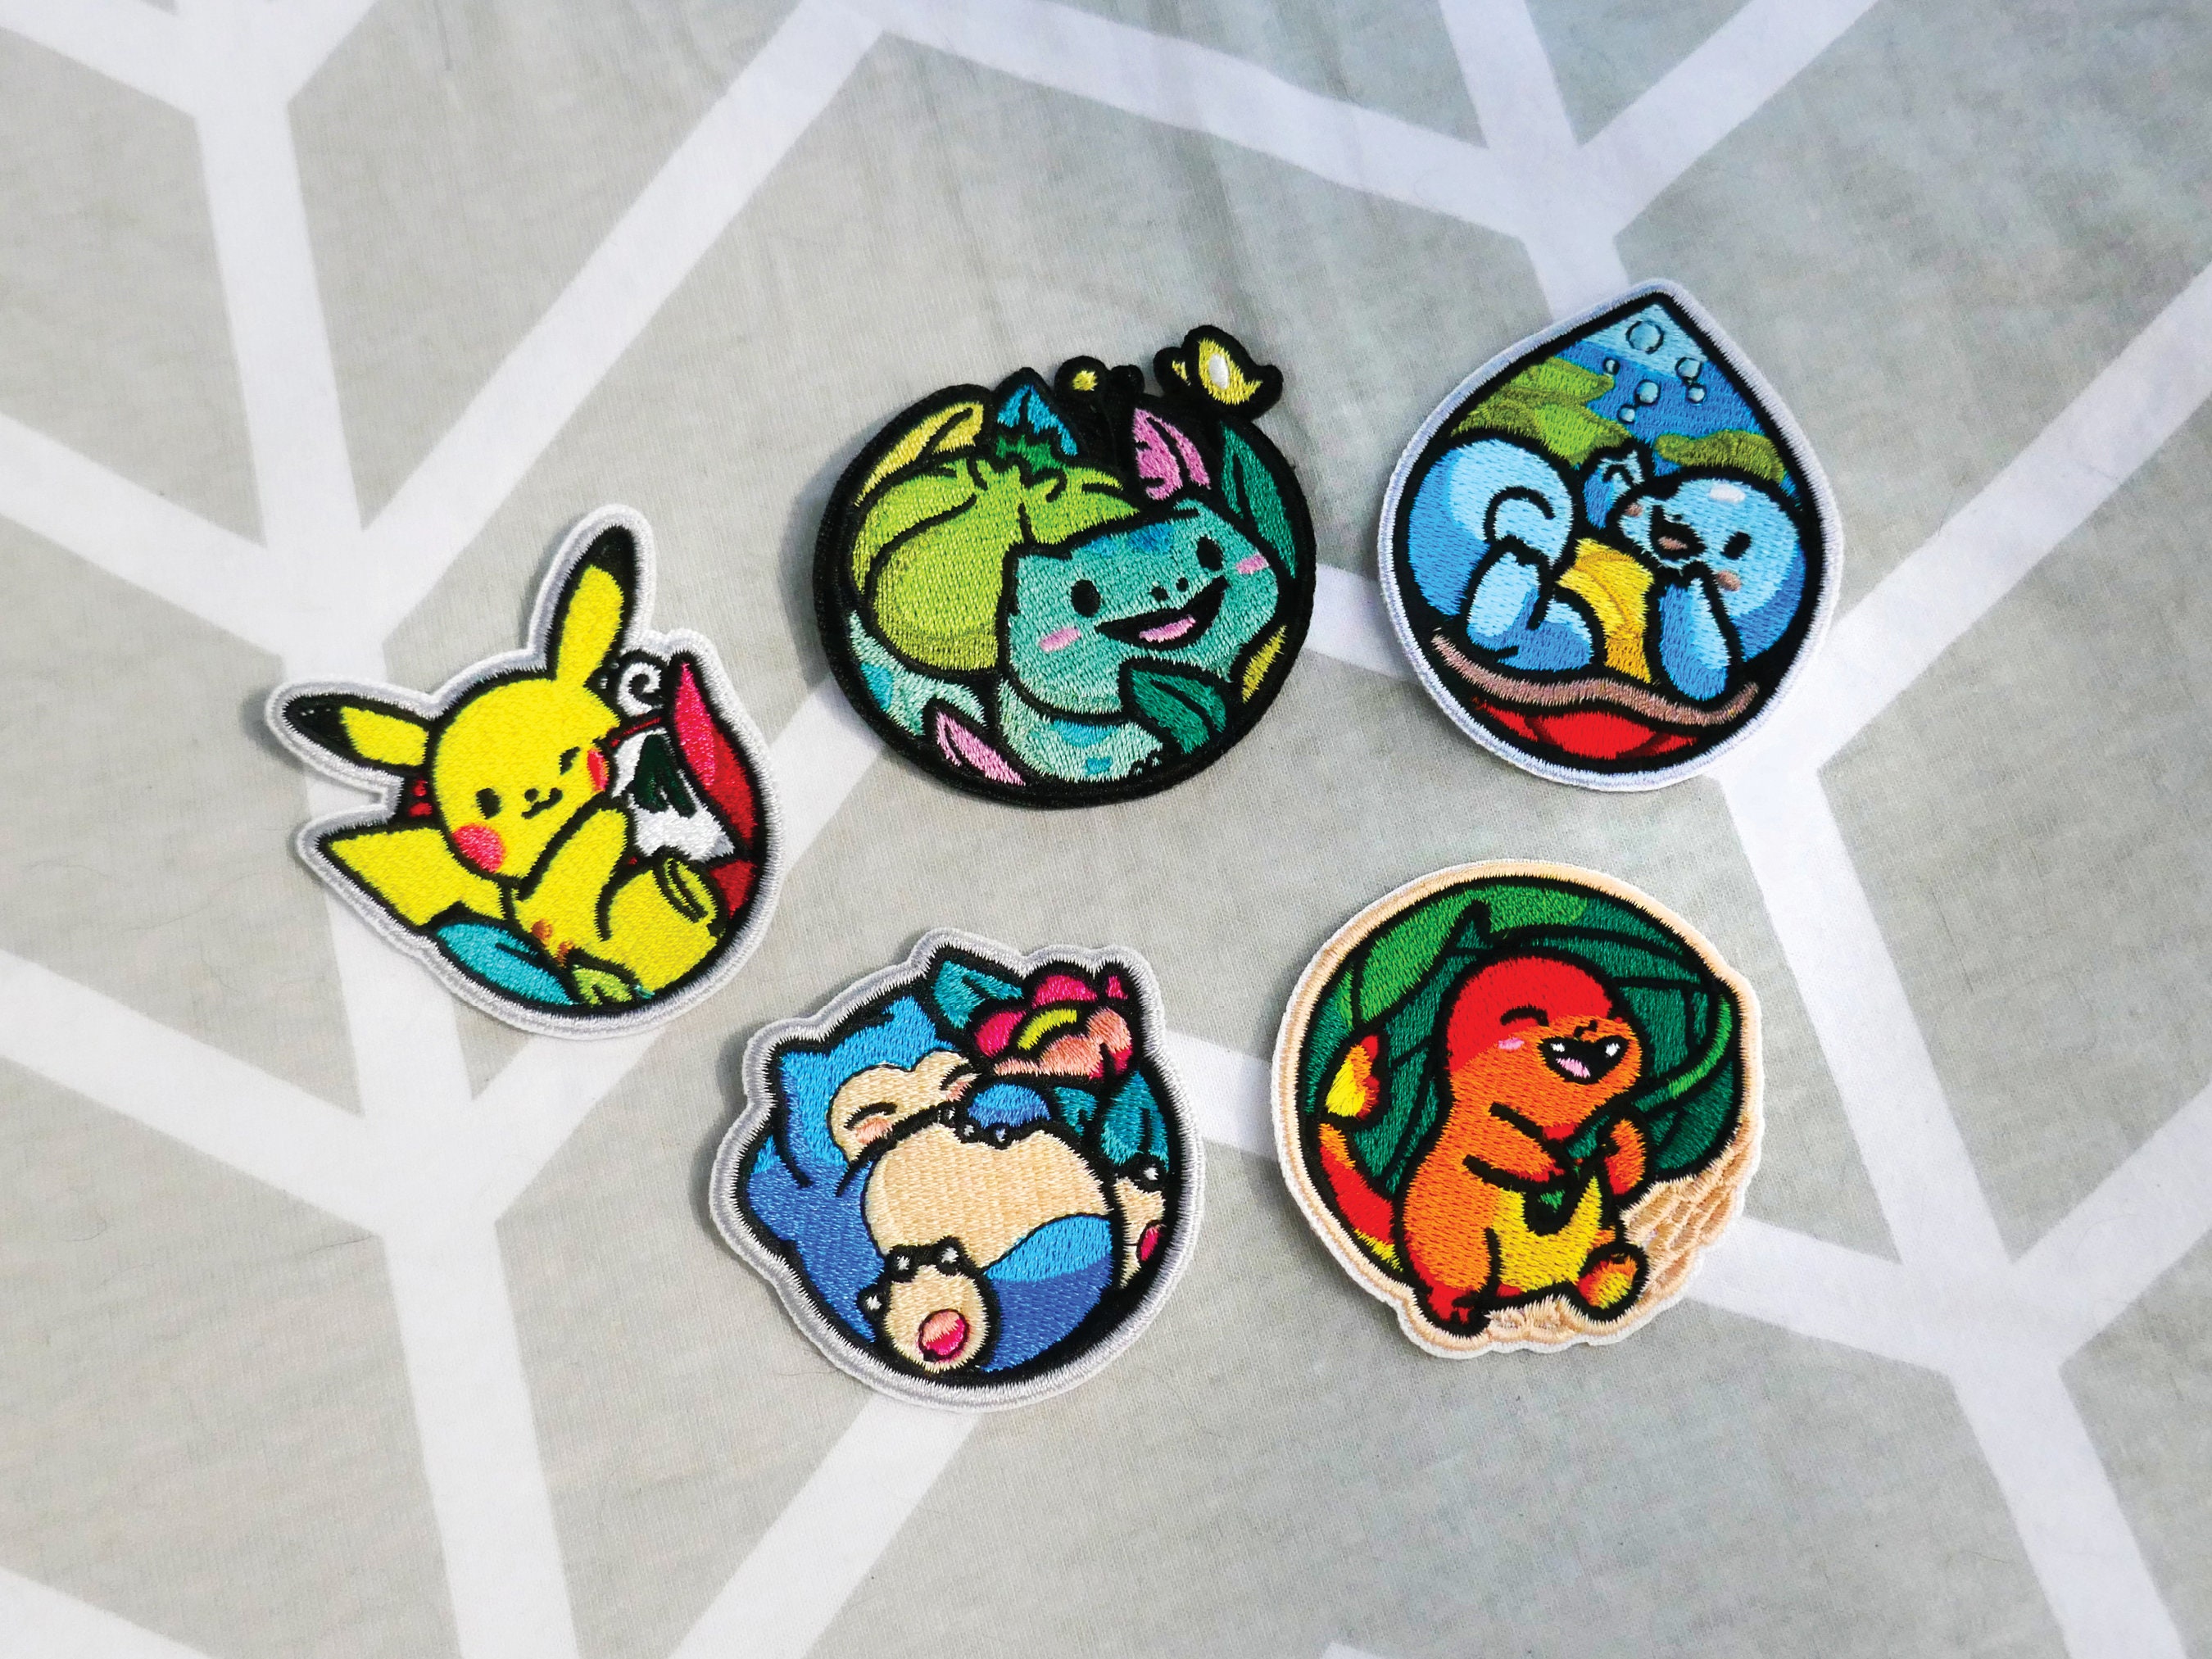 POKEMON IRON ON PATCH PIKACHU BULBASAUR SQUIRTLE CHARMANDER W/ Trading card